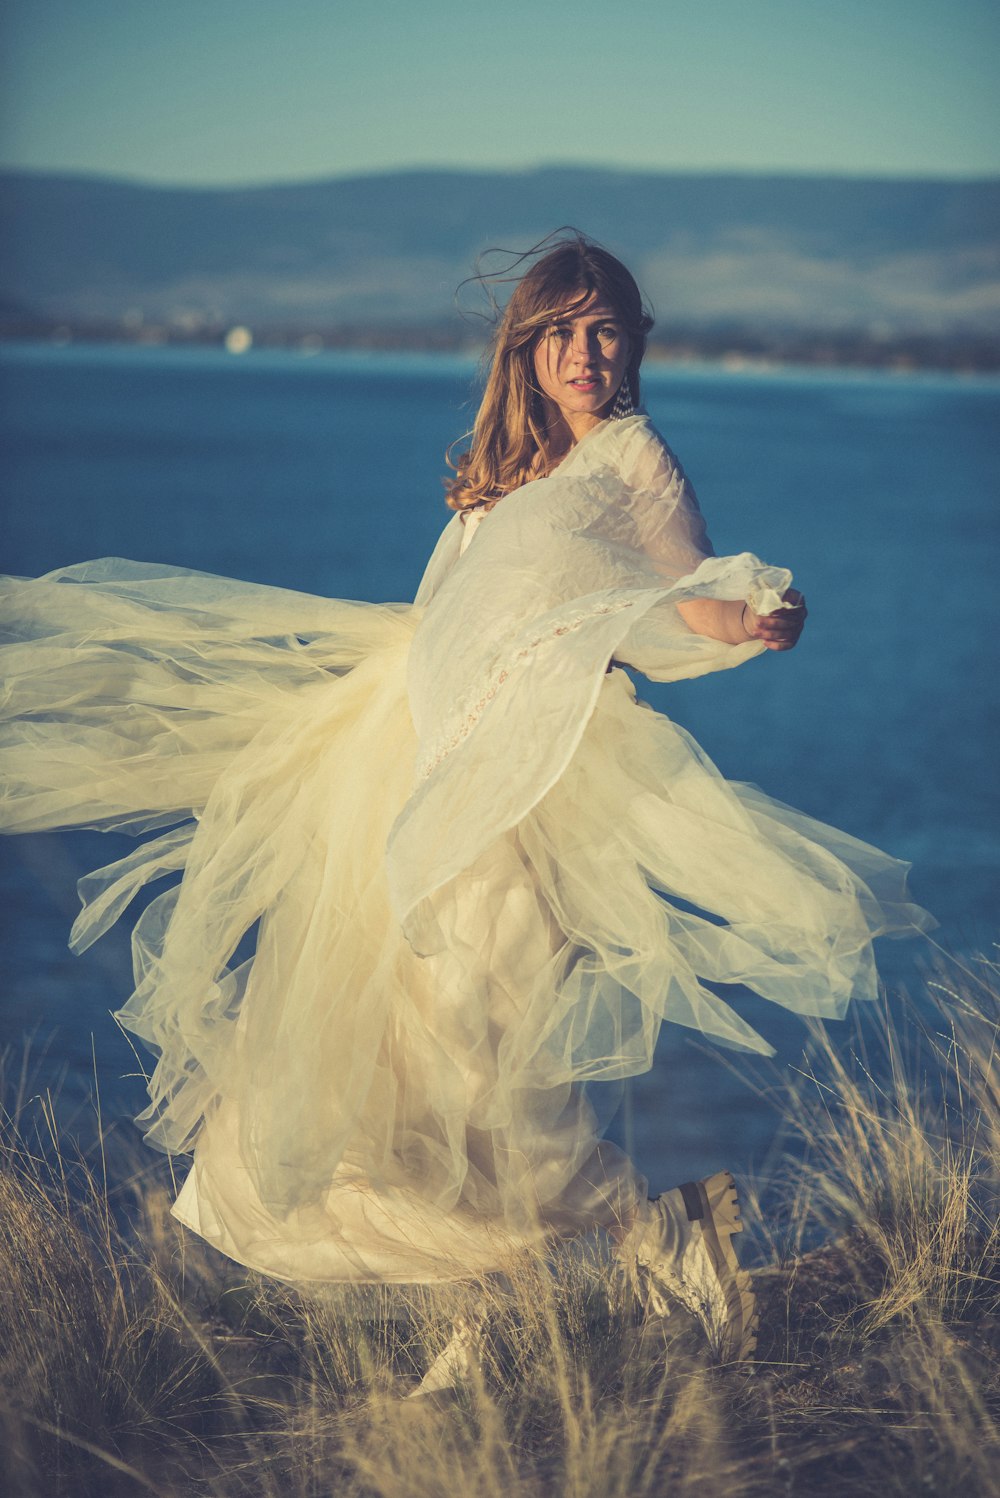 woman in white dress standing on brown grass field near body of water during daytime